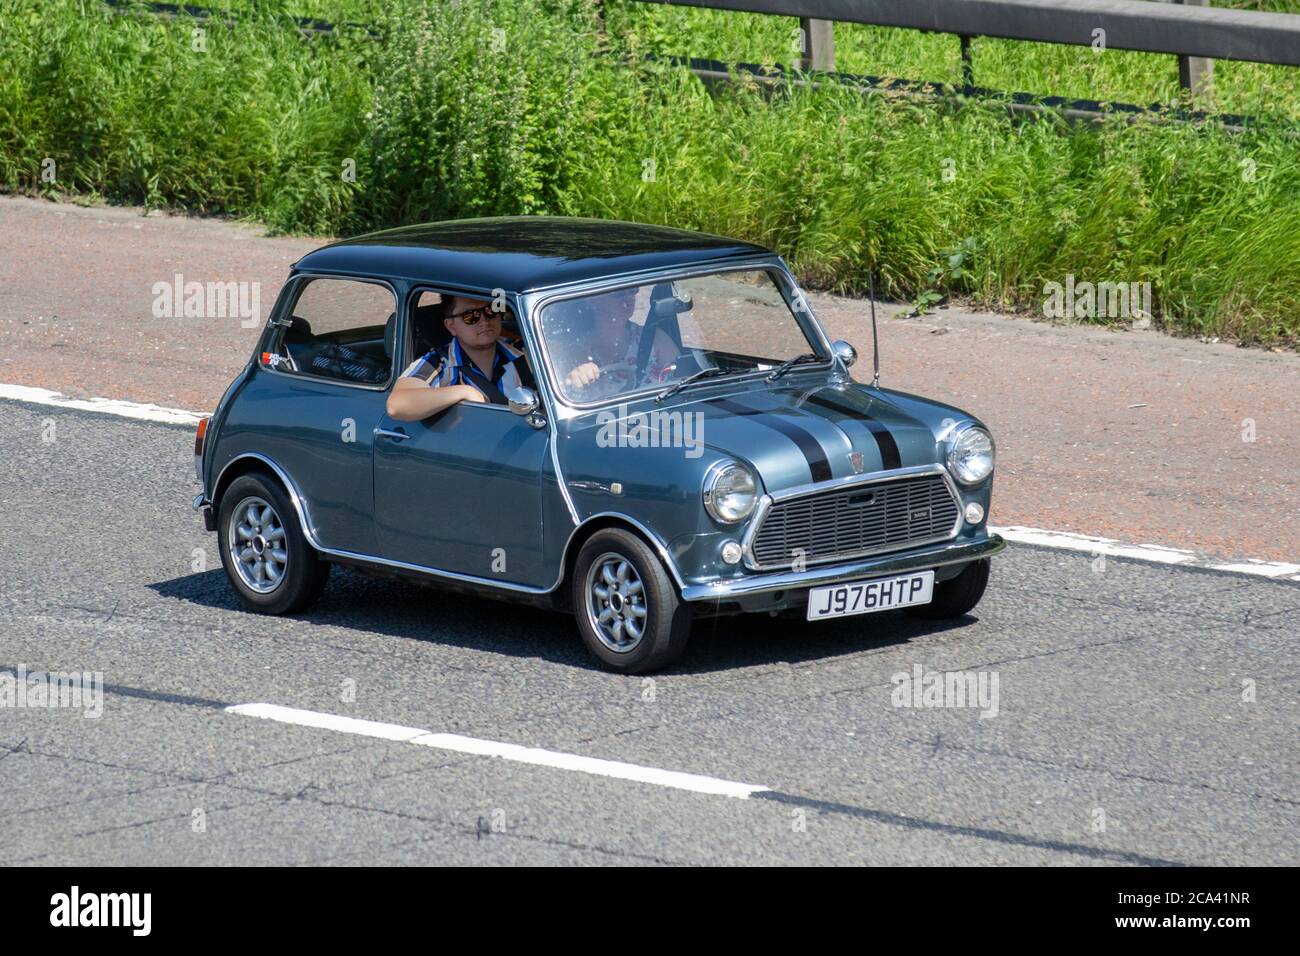 Blue black stripes 1991 Rover Mini Neon; Vehicular traffic moving vehicles, classic cars, cherished veteran, restored old timer, collectible motors, vintage heritage, old preserved, collectable cars driving vehicle on UK roads, motors, motoring on the M6 motorway highway network. Stock Photo